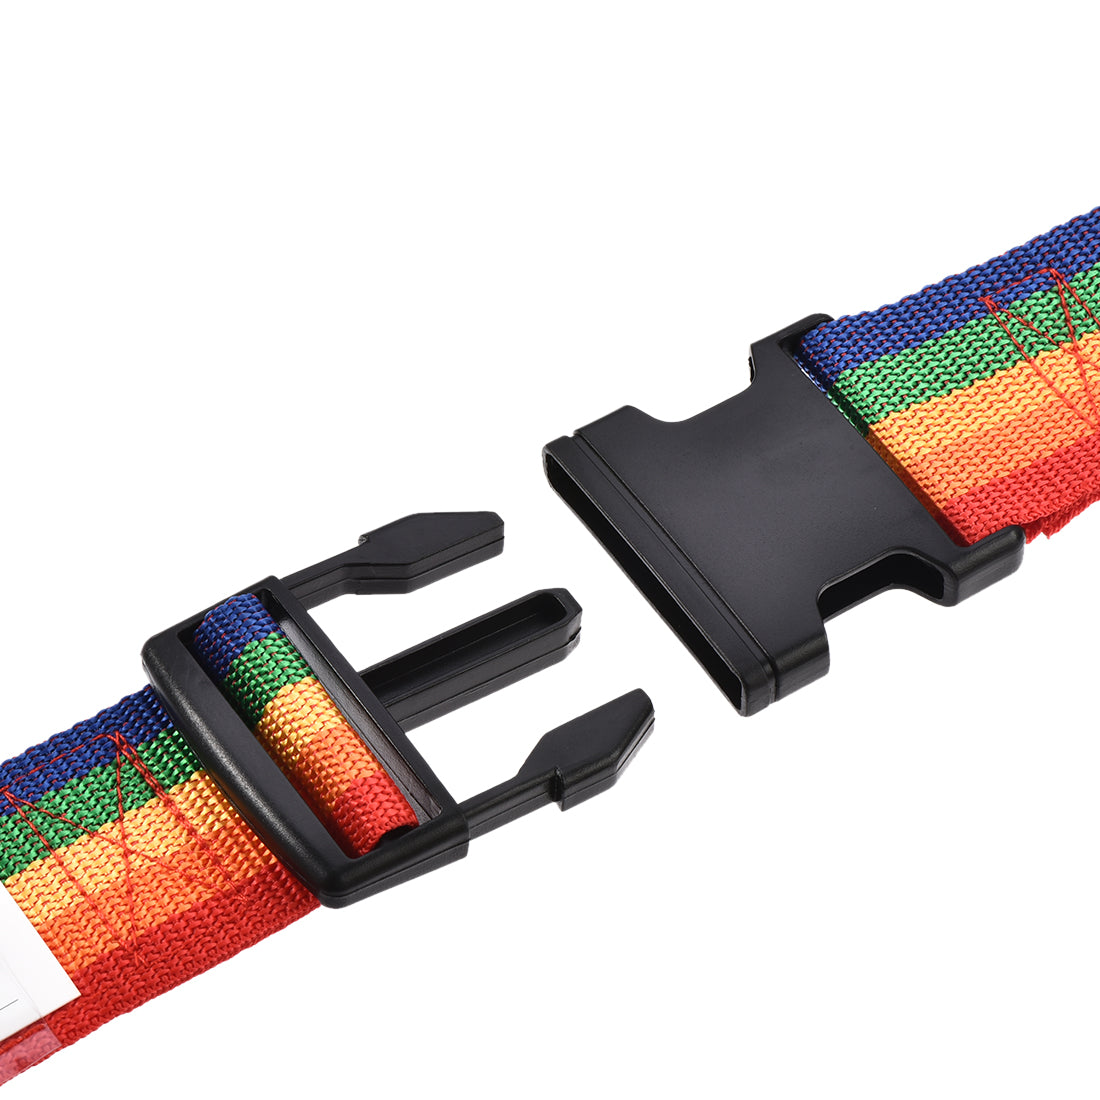 uxcell Uxcell Luggage Strap Suitcase Belt with Buckle, 4Mx5cm Cross Adjustable PP Travel Packing Accessory, Multi Color (Red Orange Yellow Green Blue)